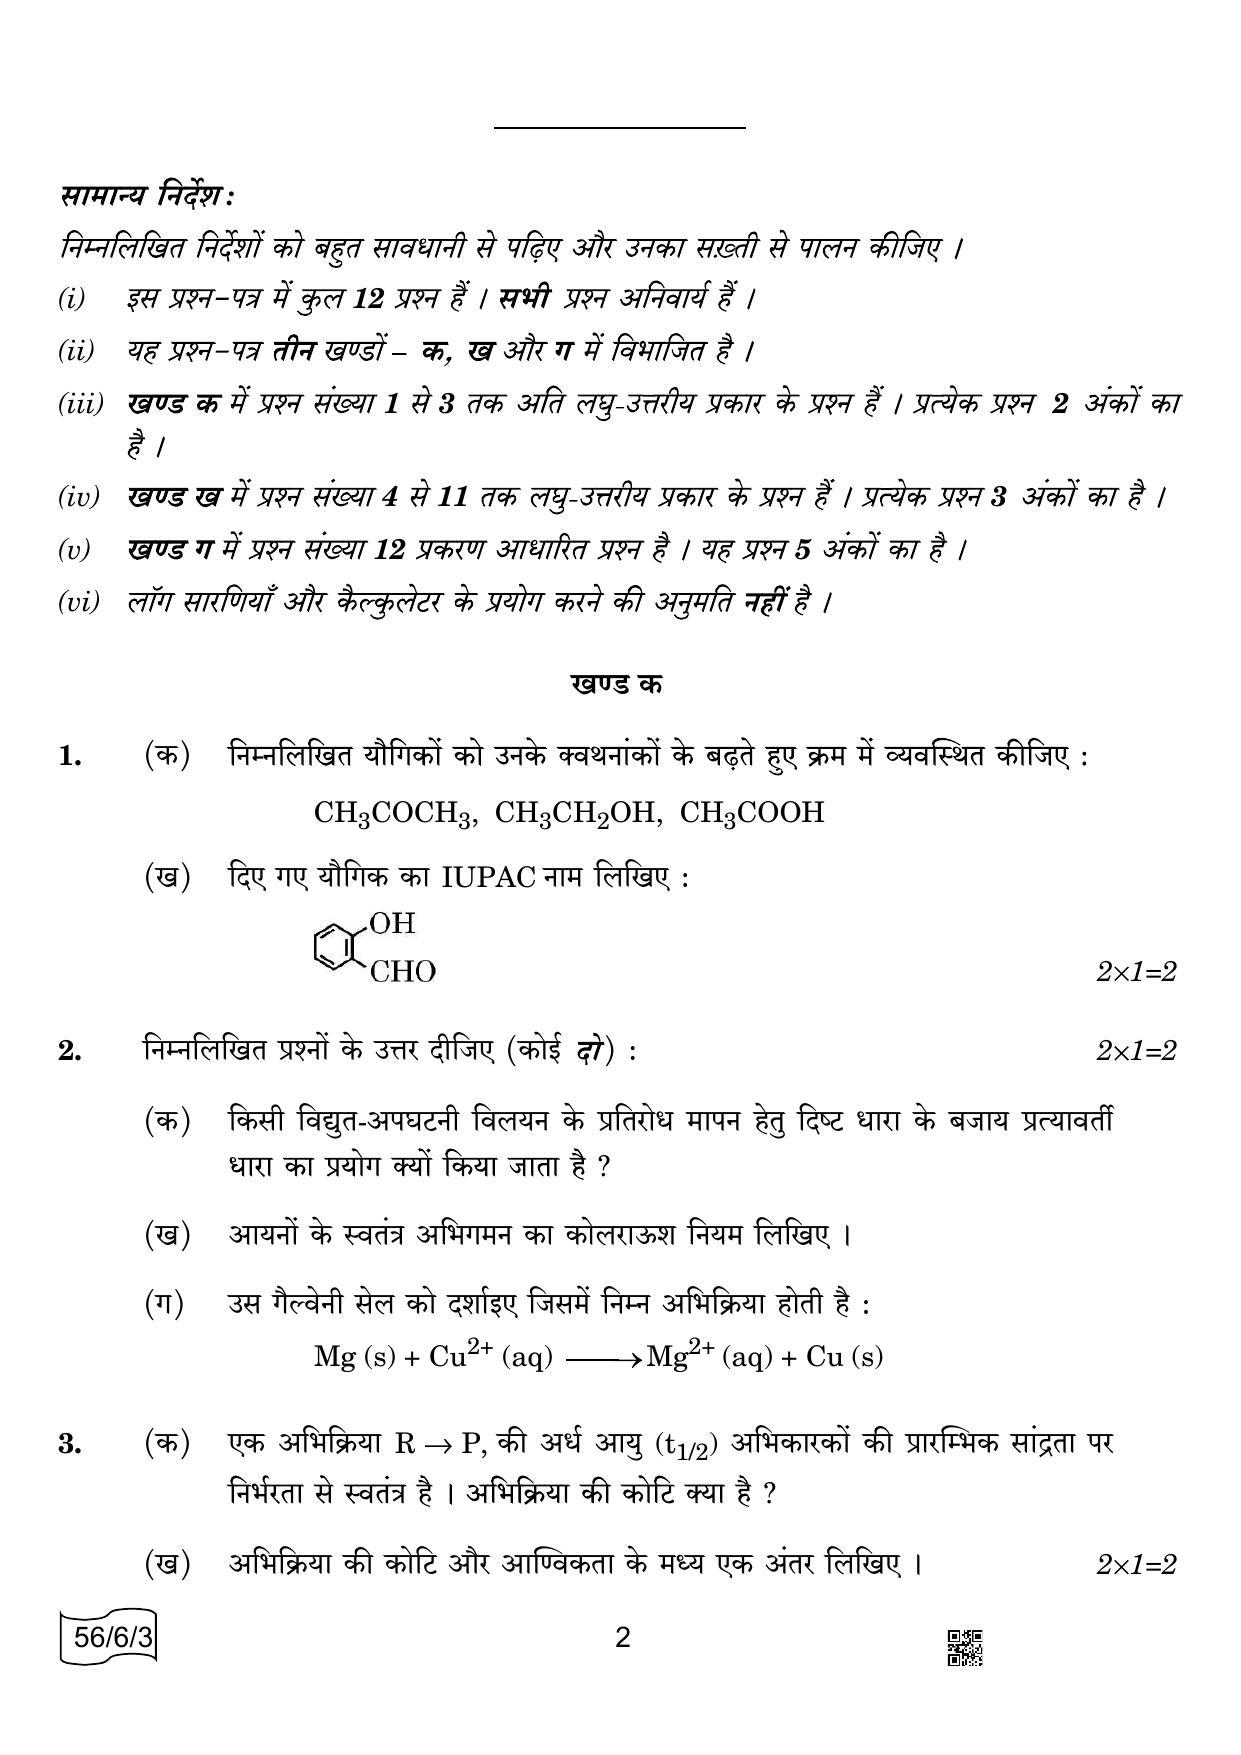 CBSE Class 12 56-6-3 CHEMISTRY 2022 Compartment Question Paper - Page 2